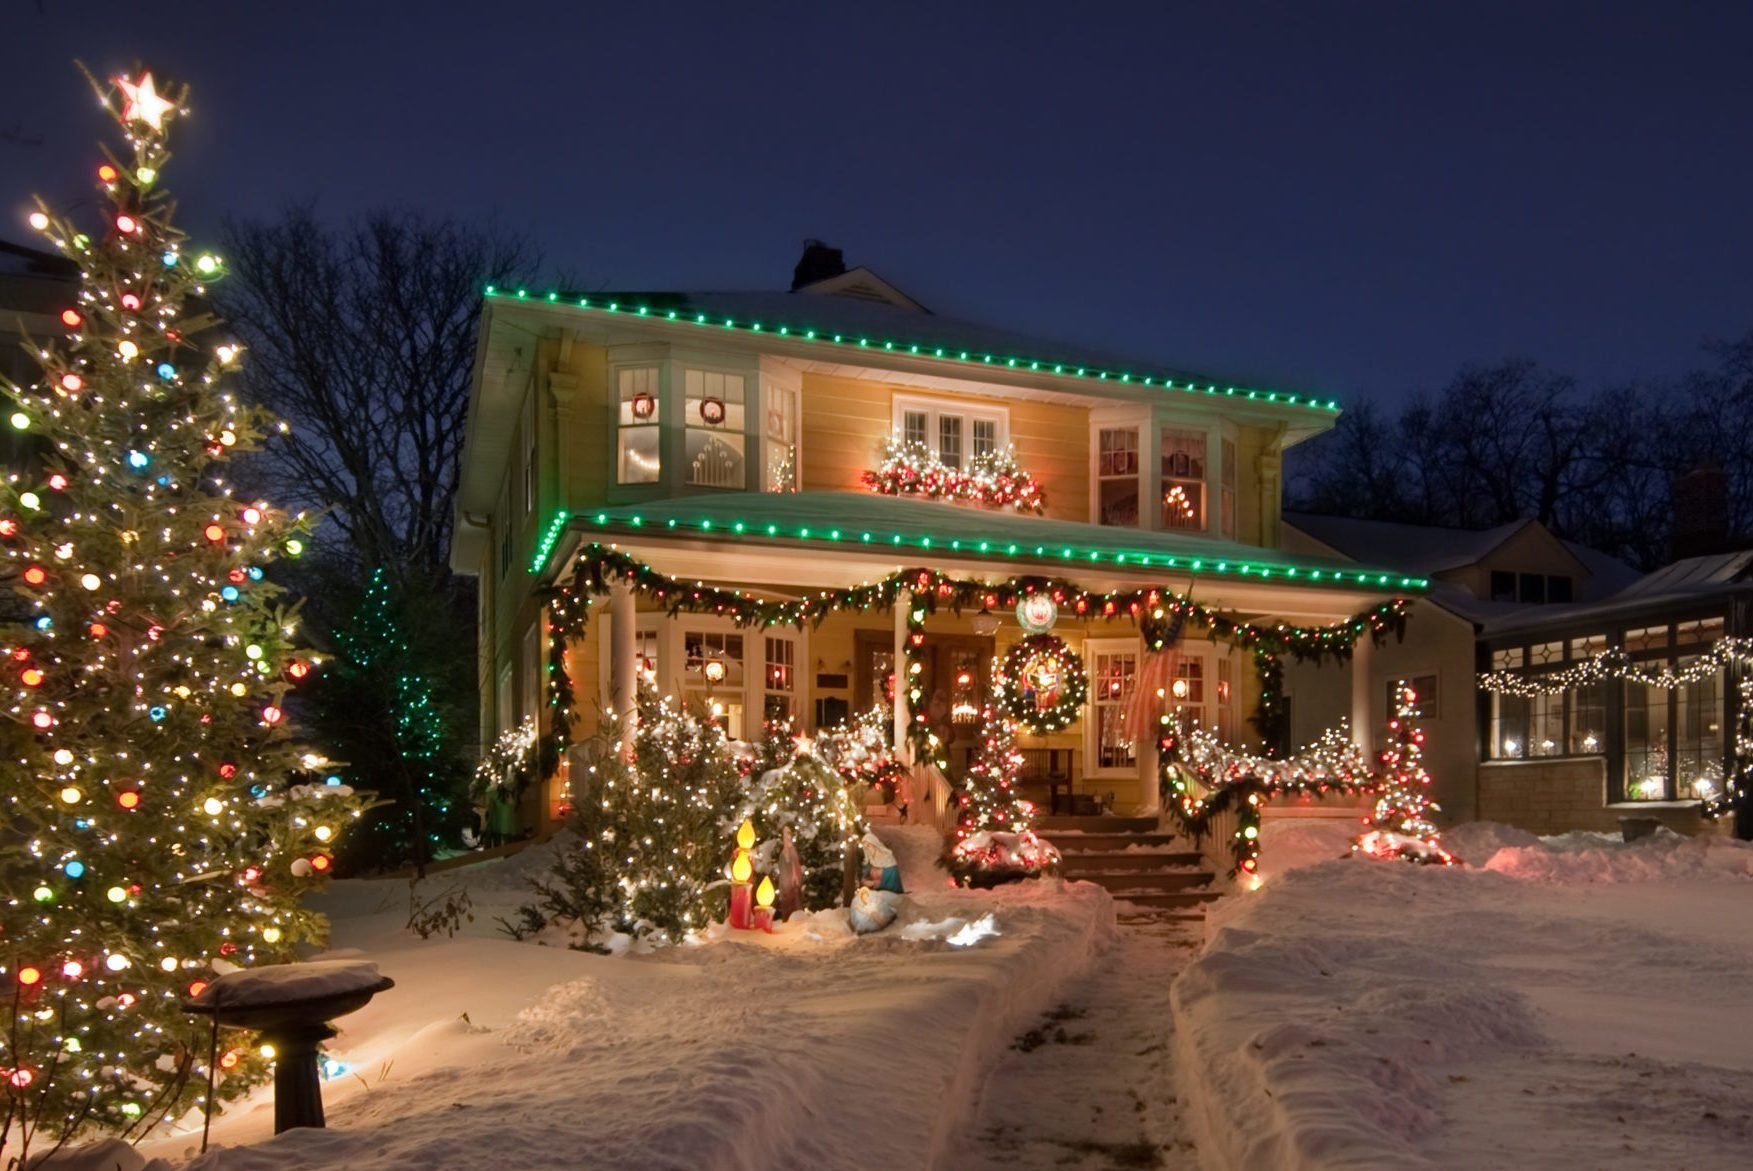 Transform your yard with christmas lights for yard decoration this ...